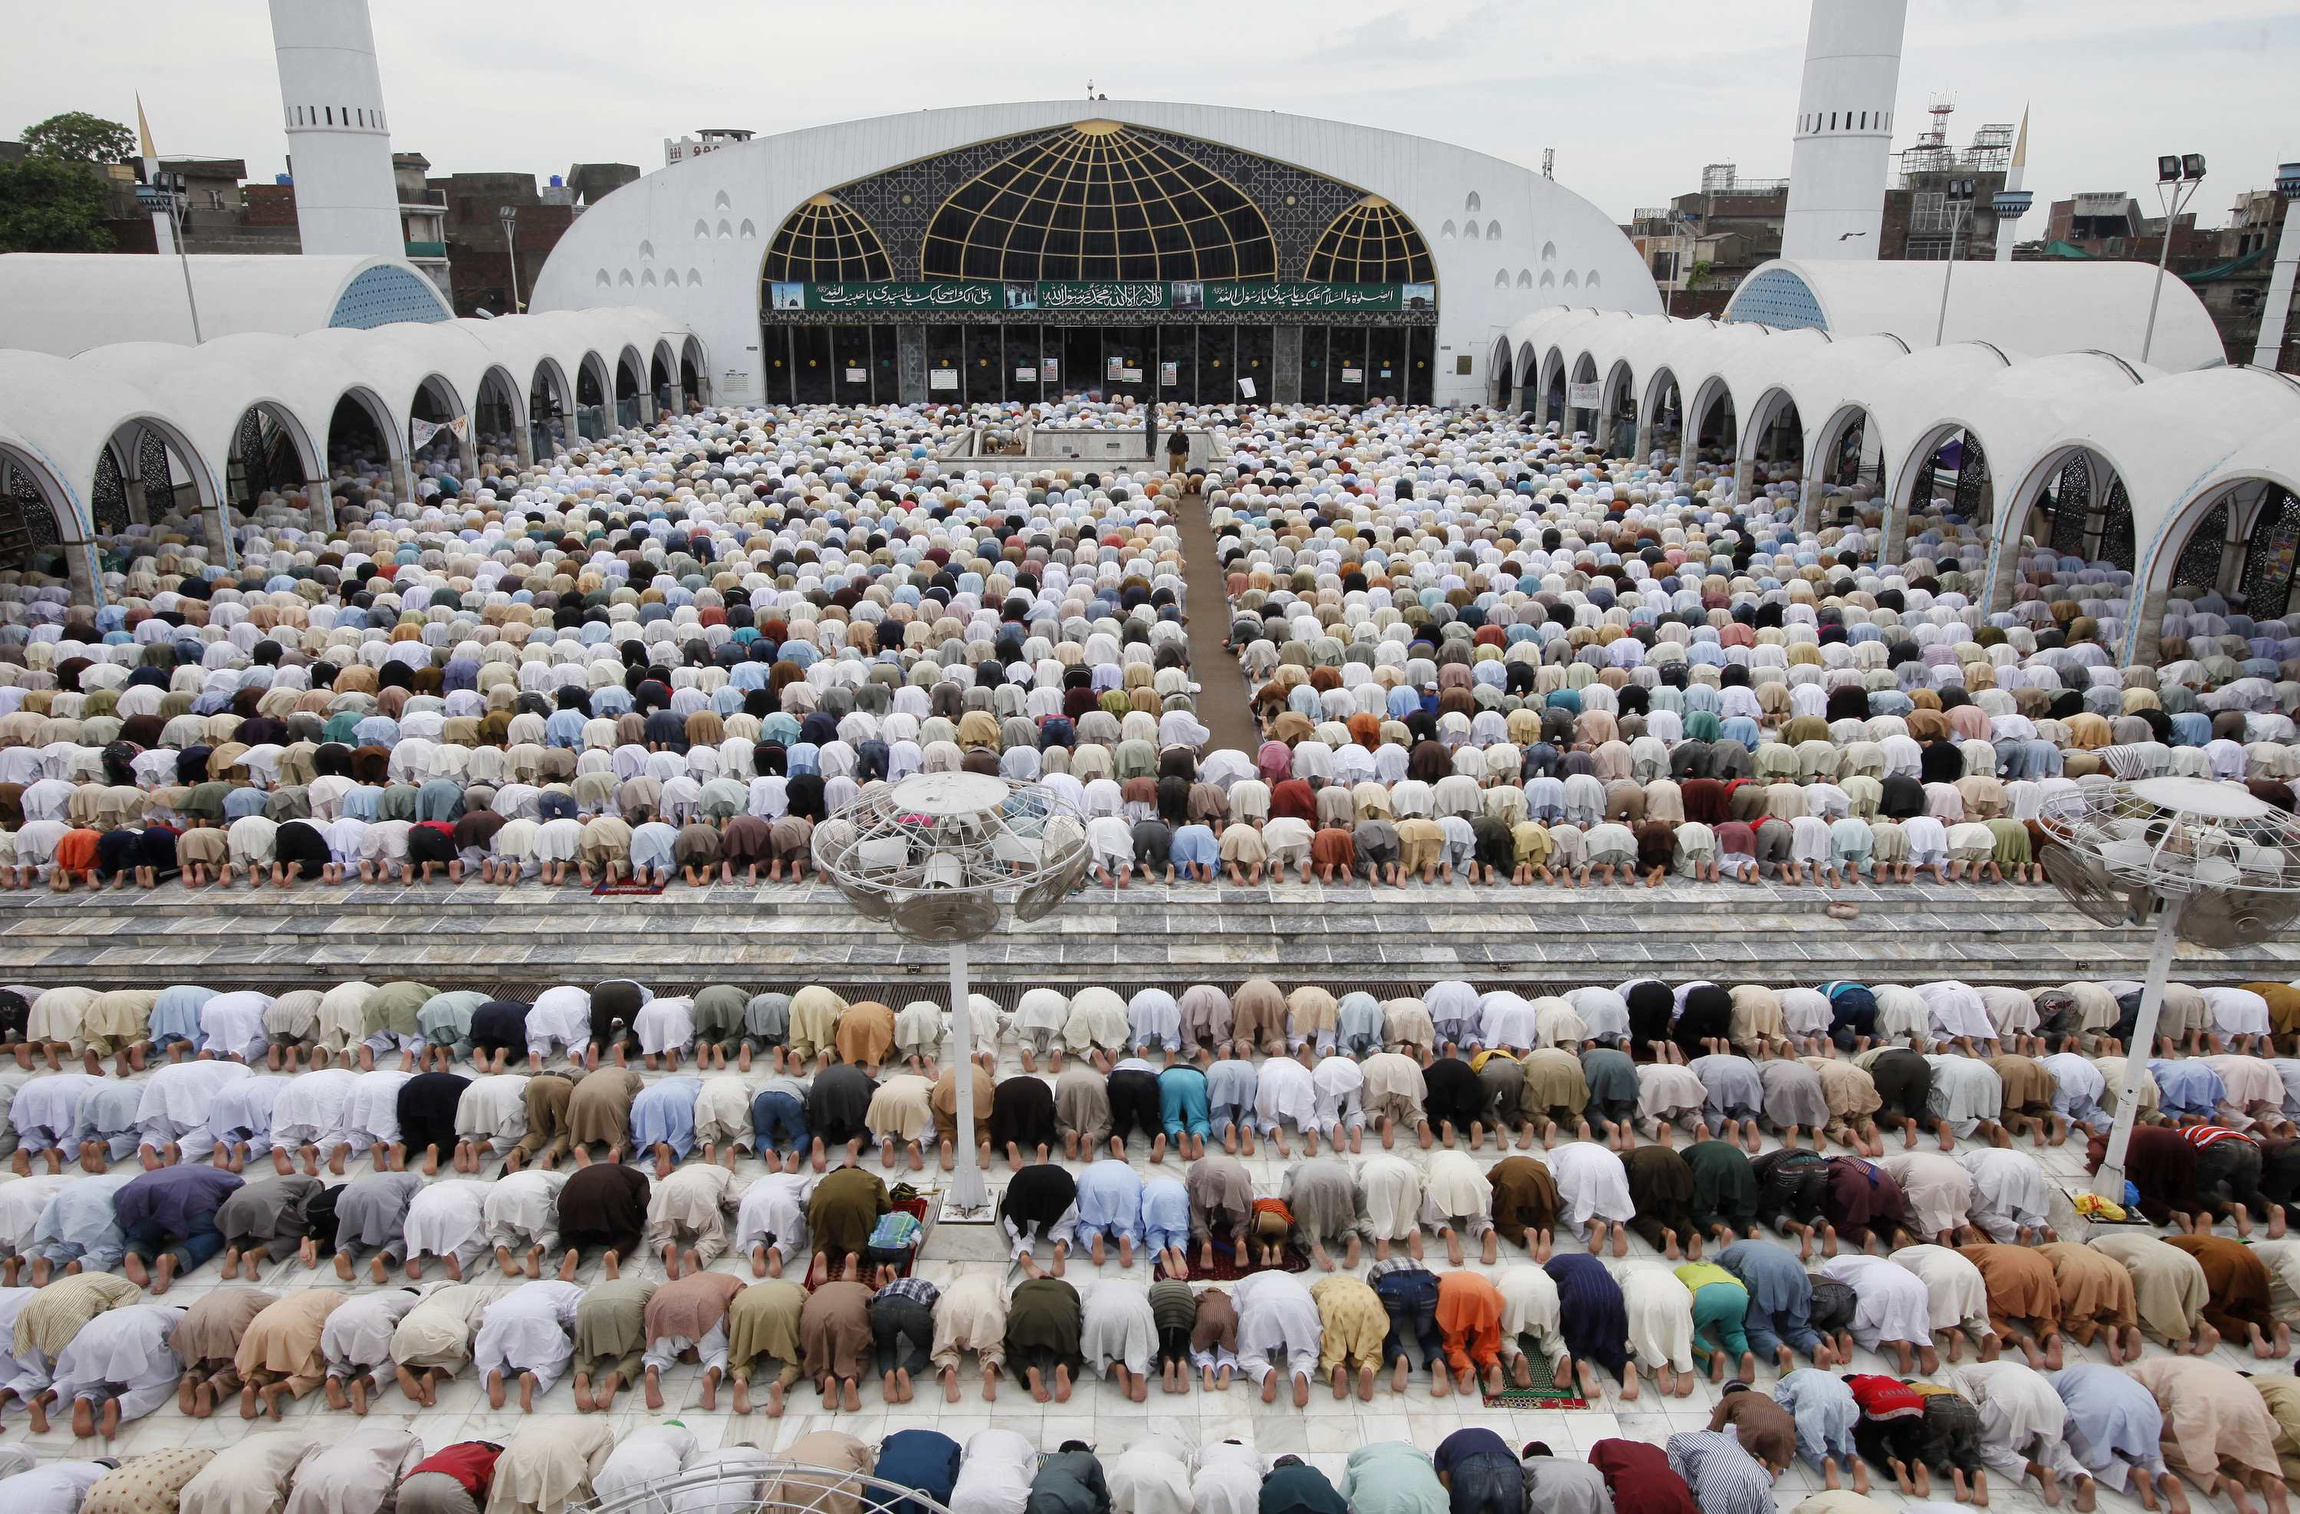 Muslim worshippers attend Friday prayers during the holy month of Ramadan at the Data Darbar mosque in Lahore, Pakistan, Aug. 2, 2013. (CNS/Reuters/Mohsin Raza)